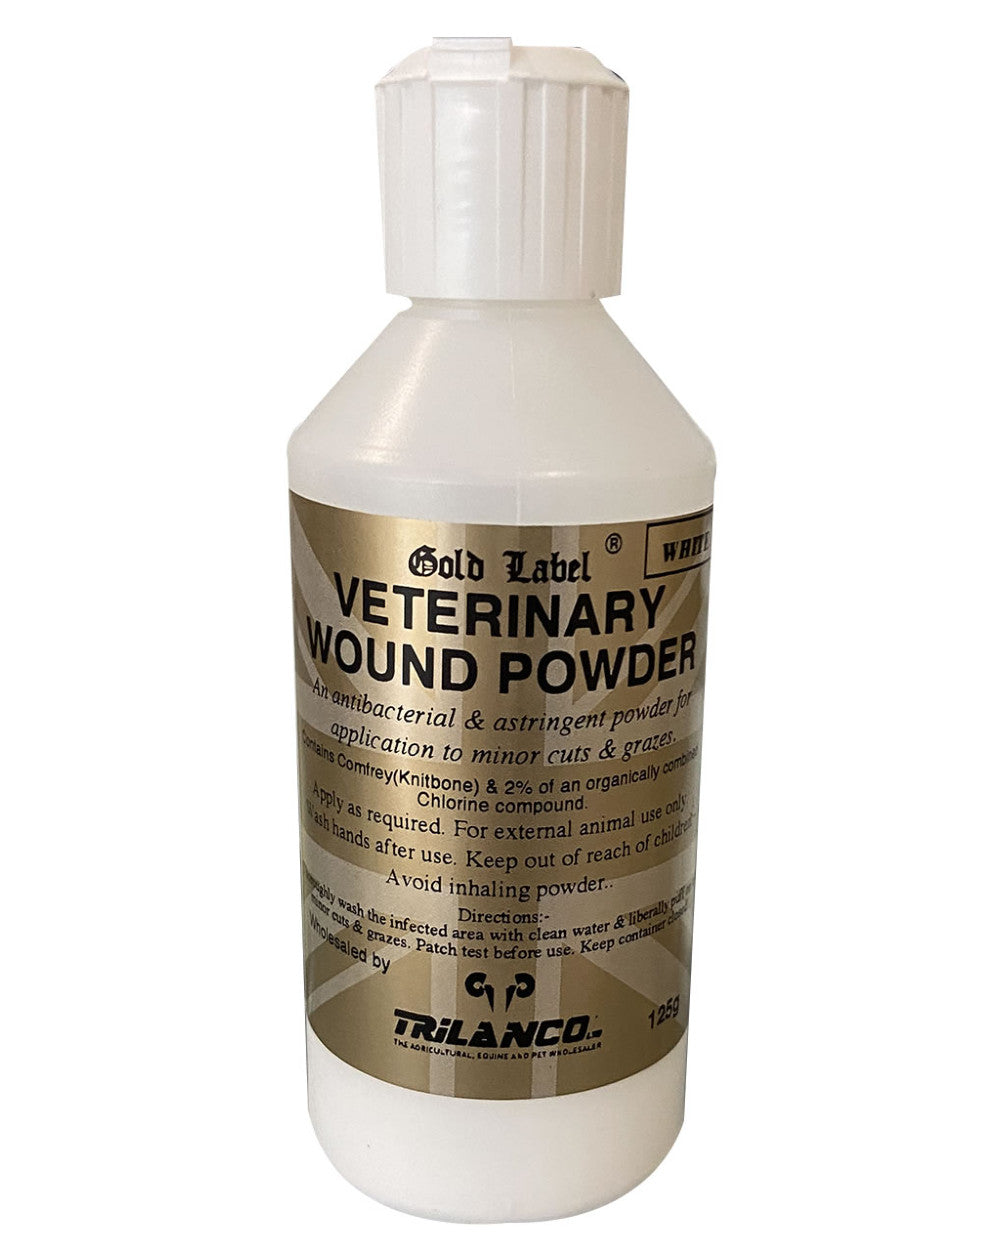 White Coloured Gold Label Veterinary Wound Powder On A White Background 